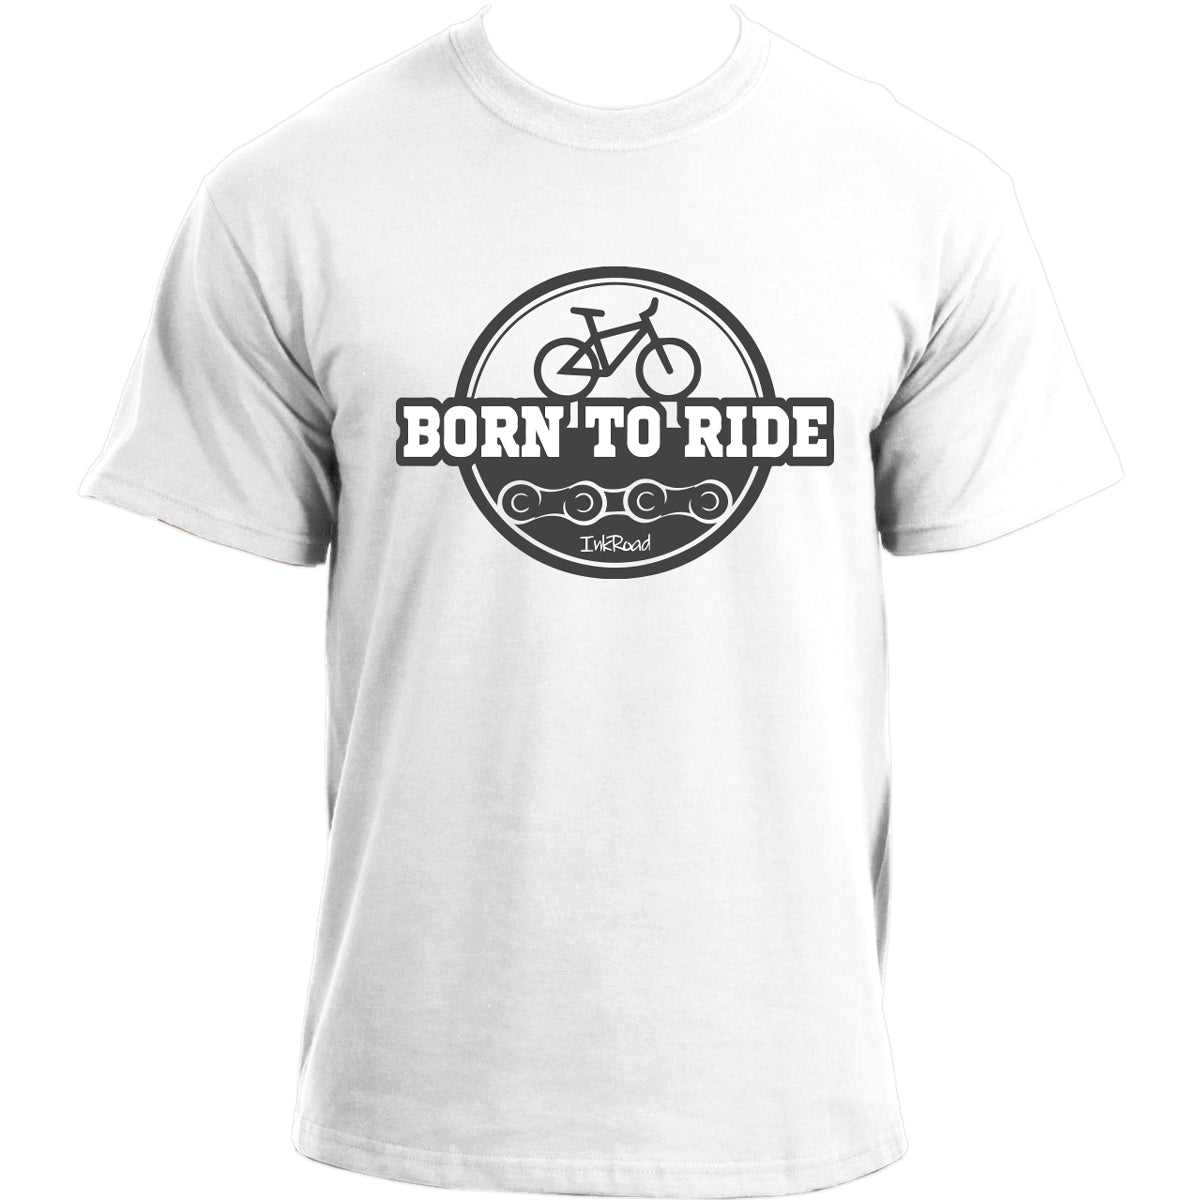 Born to Ride - Bicycle Bike tee Cycling sports top Cotton Short Sleeve T shirt